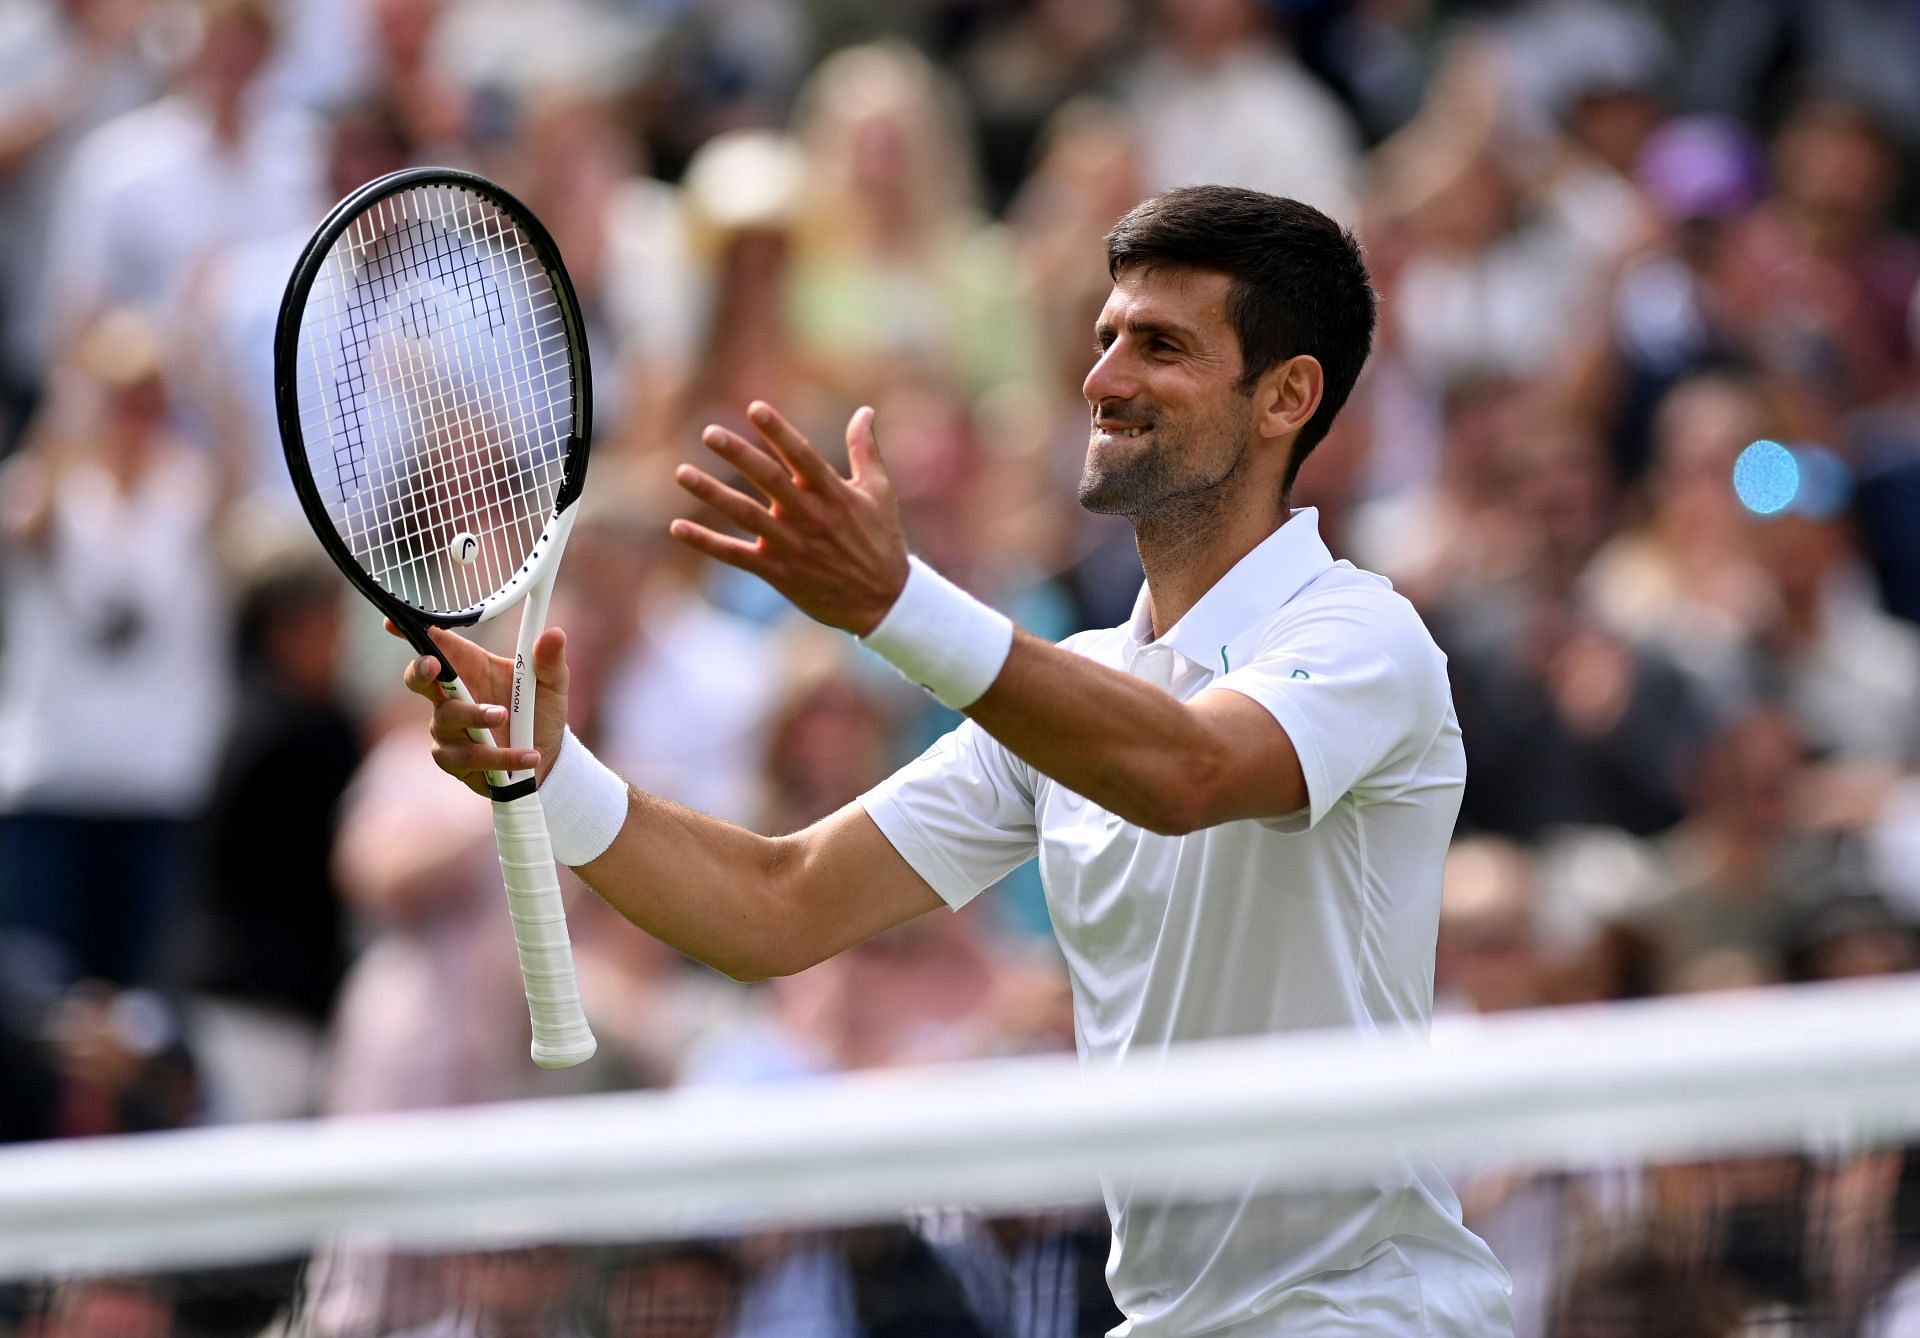 The Serb is in line to play against Rafael Nadal in the final at Wimbledon